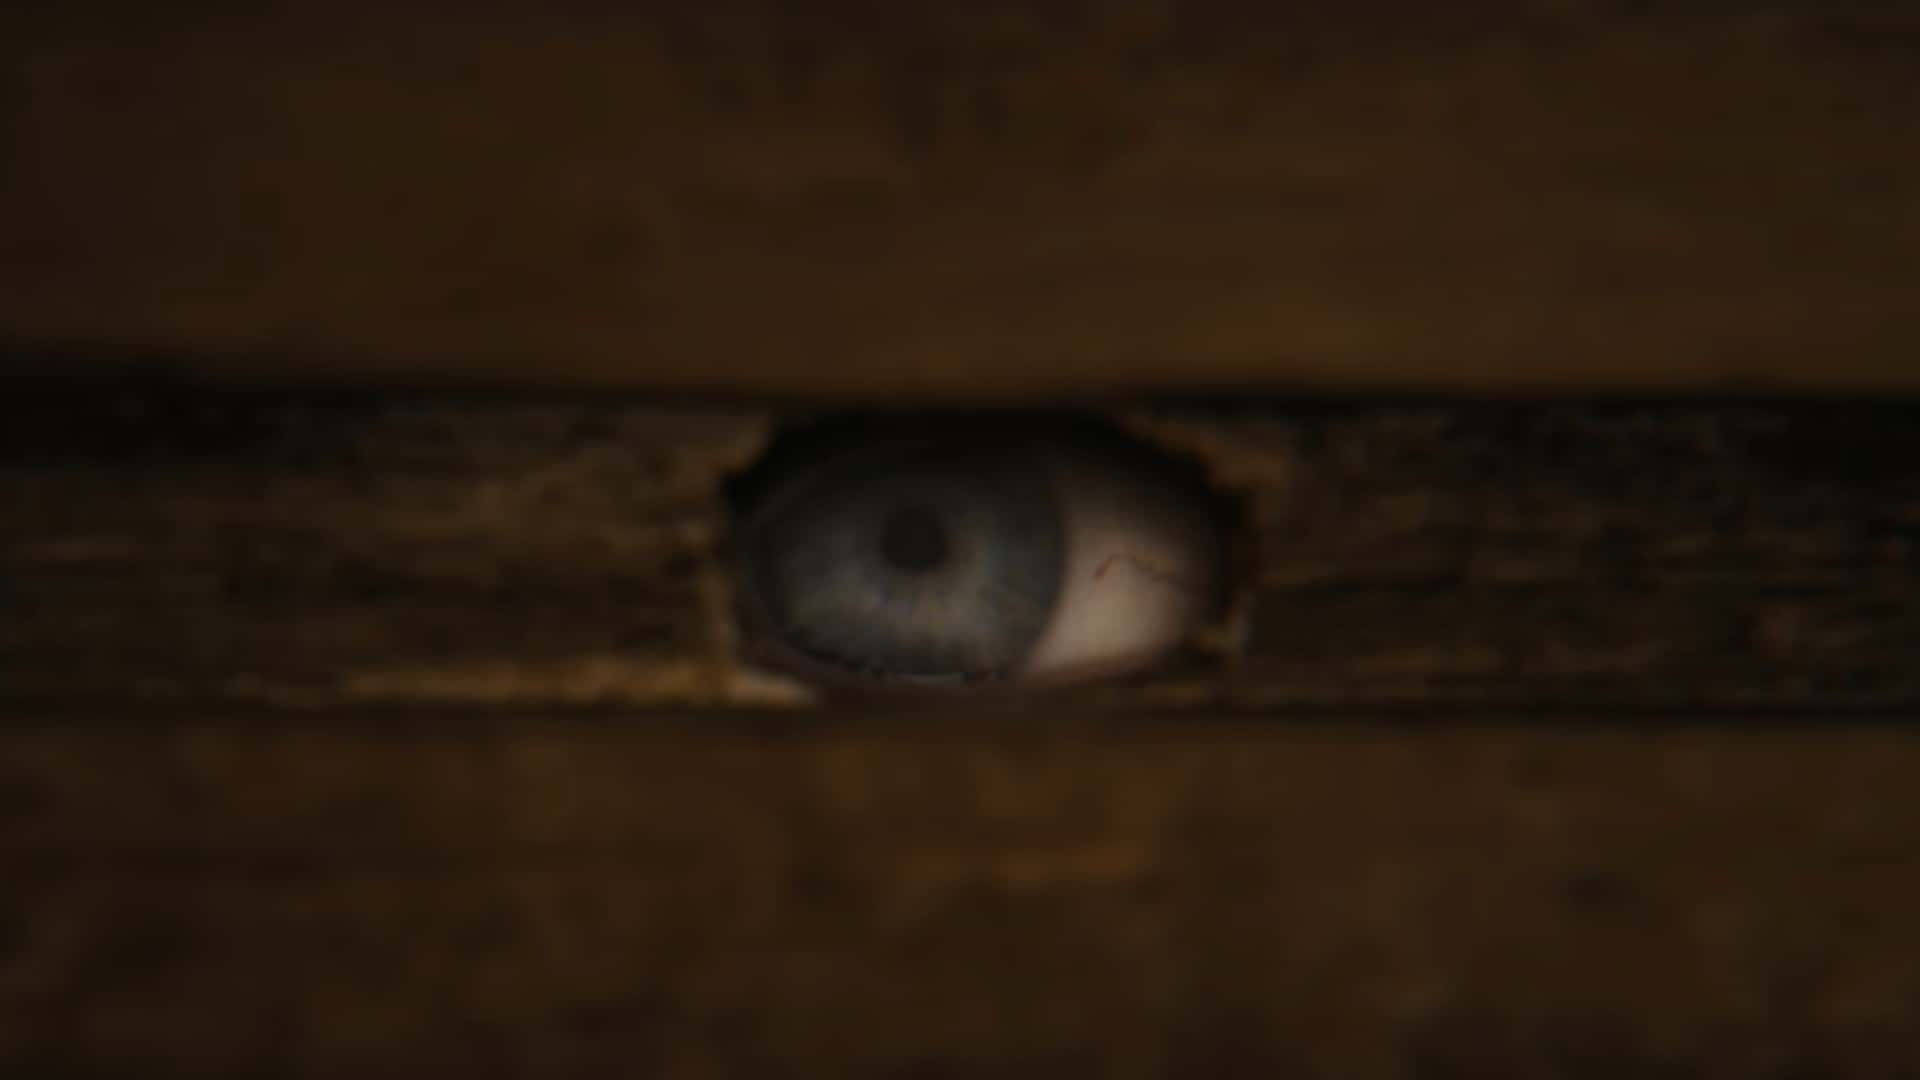 Pat's eye looking through a hole in the closet